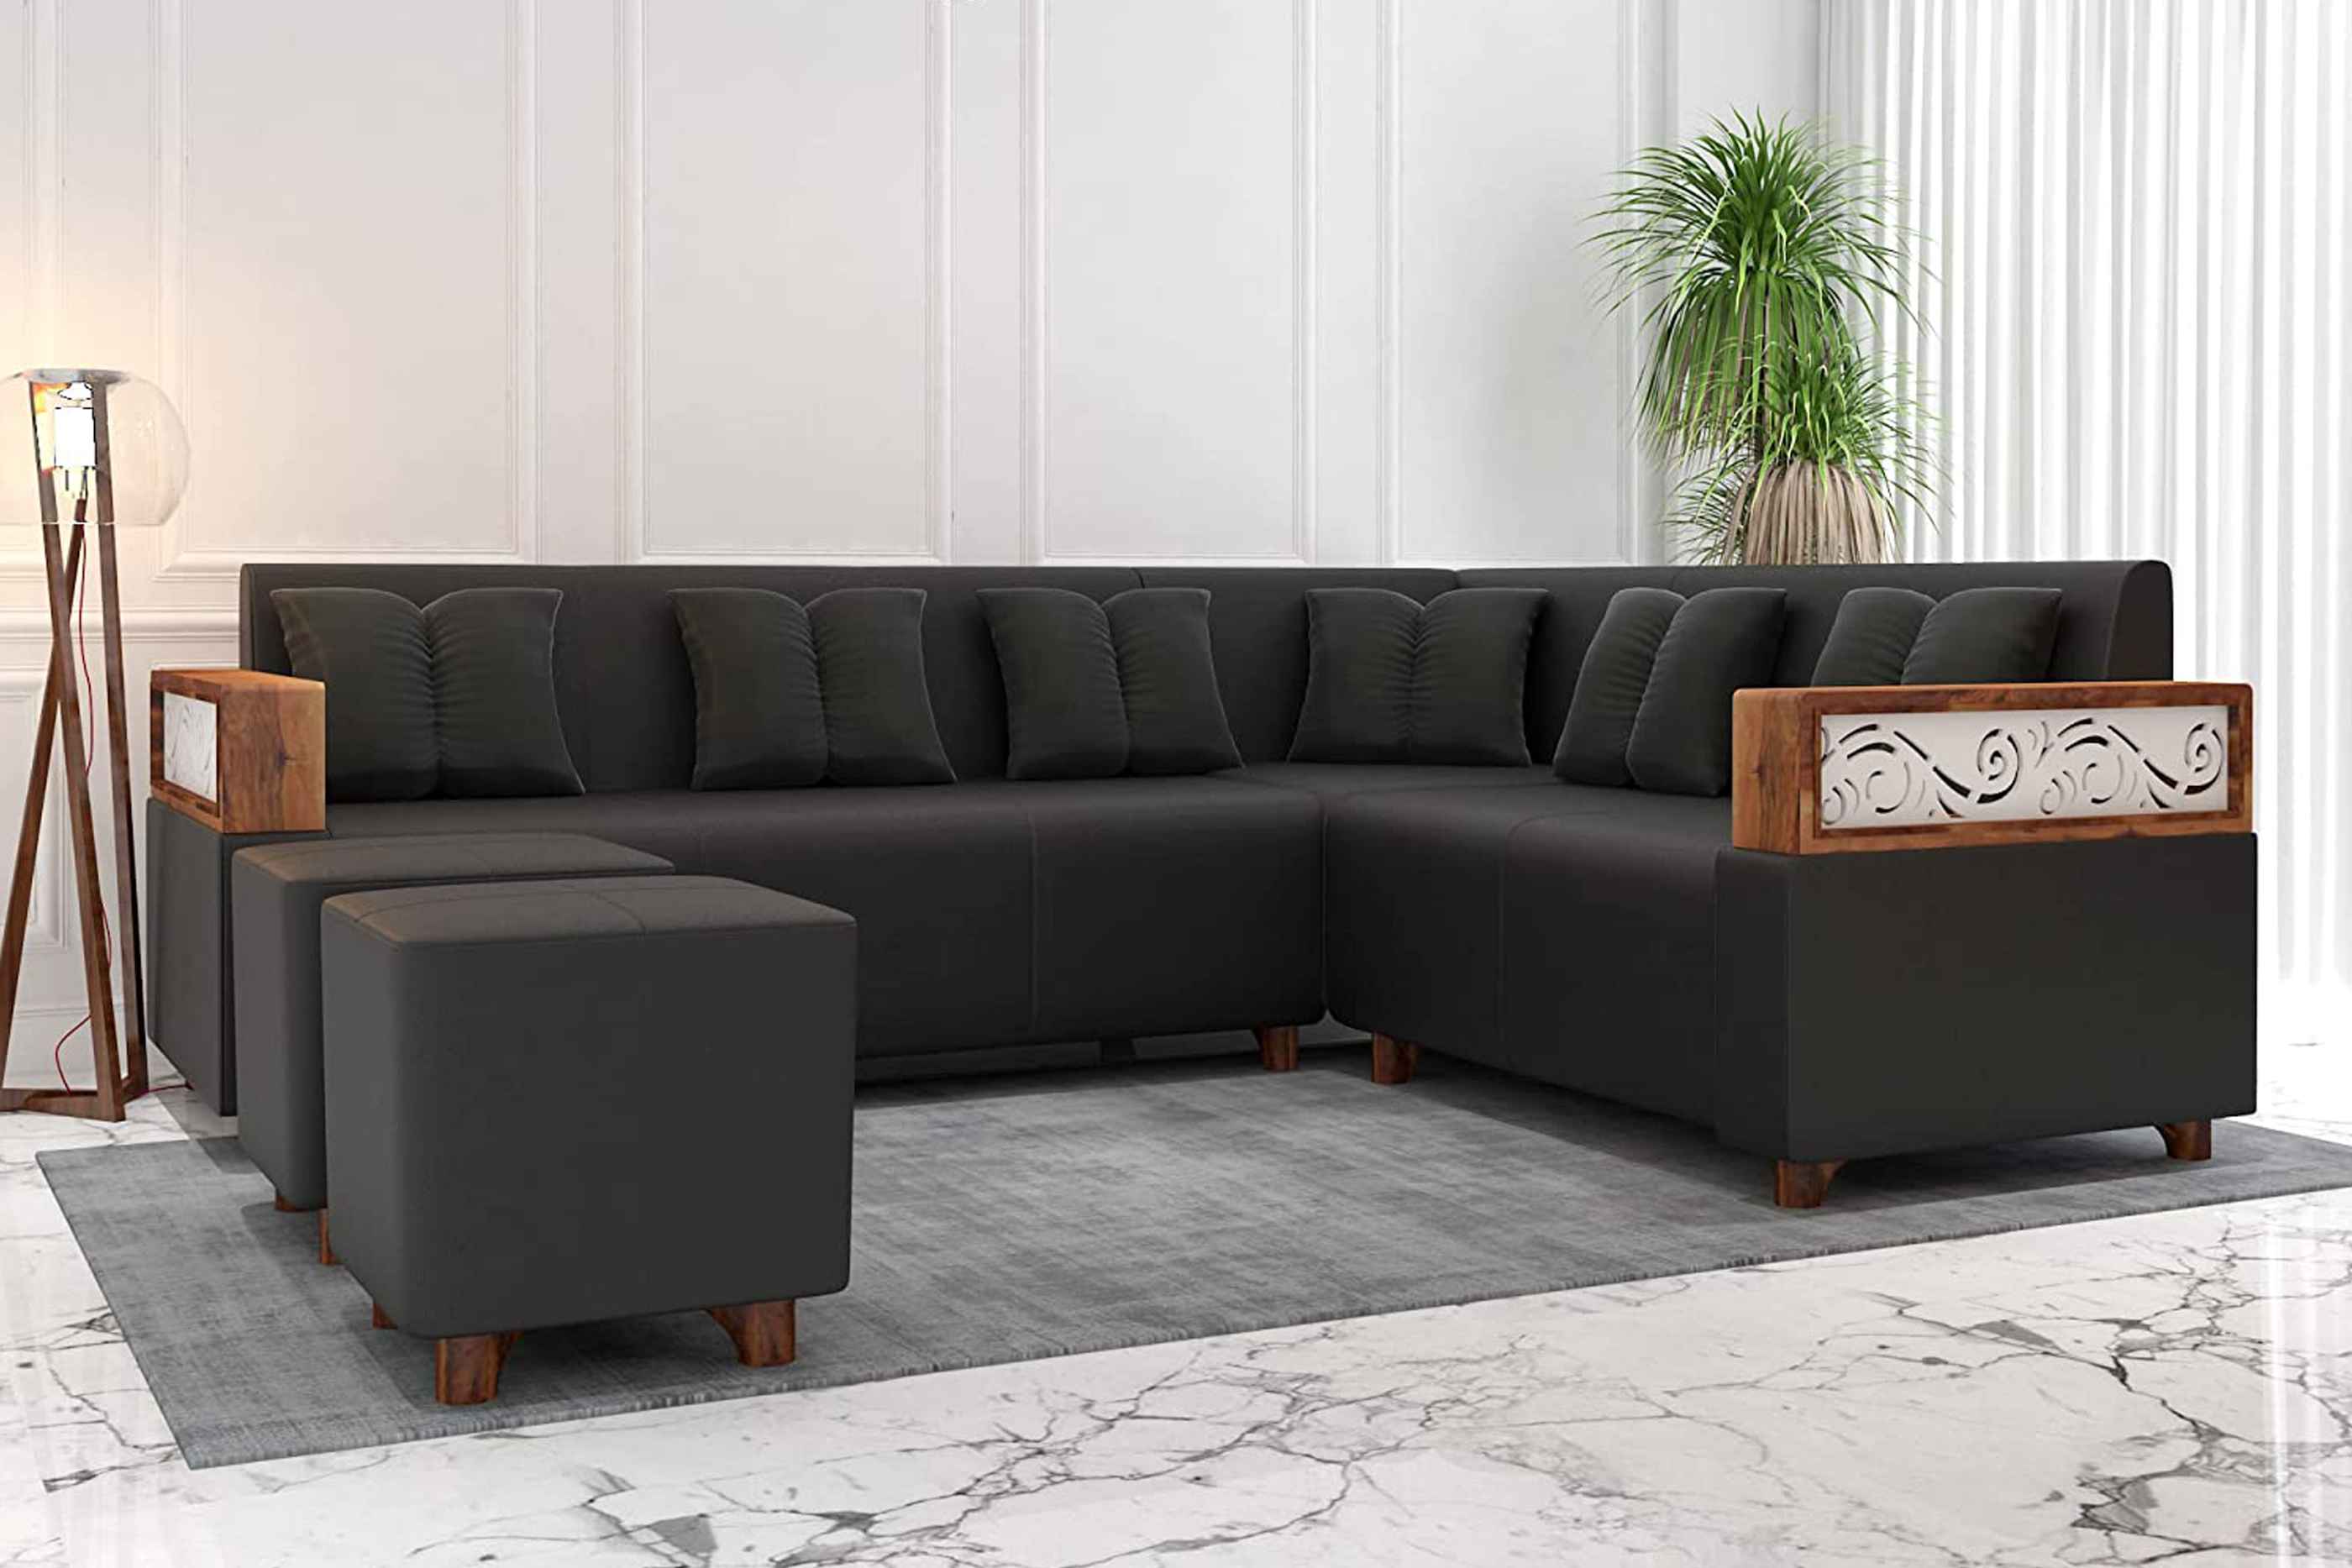 Discover 7+2 seater Perfect Sofa